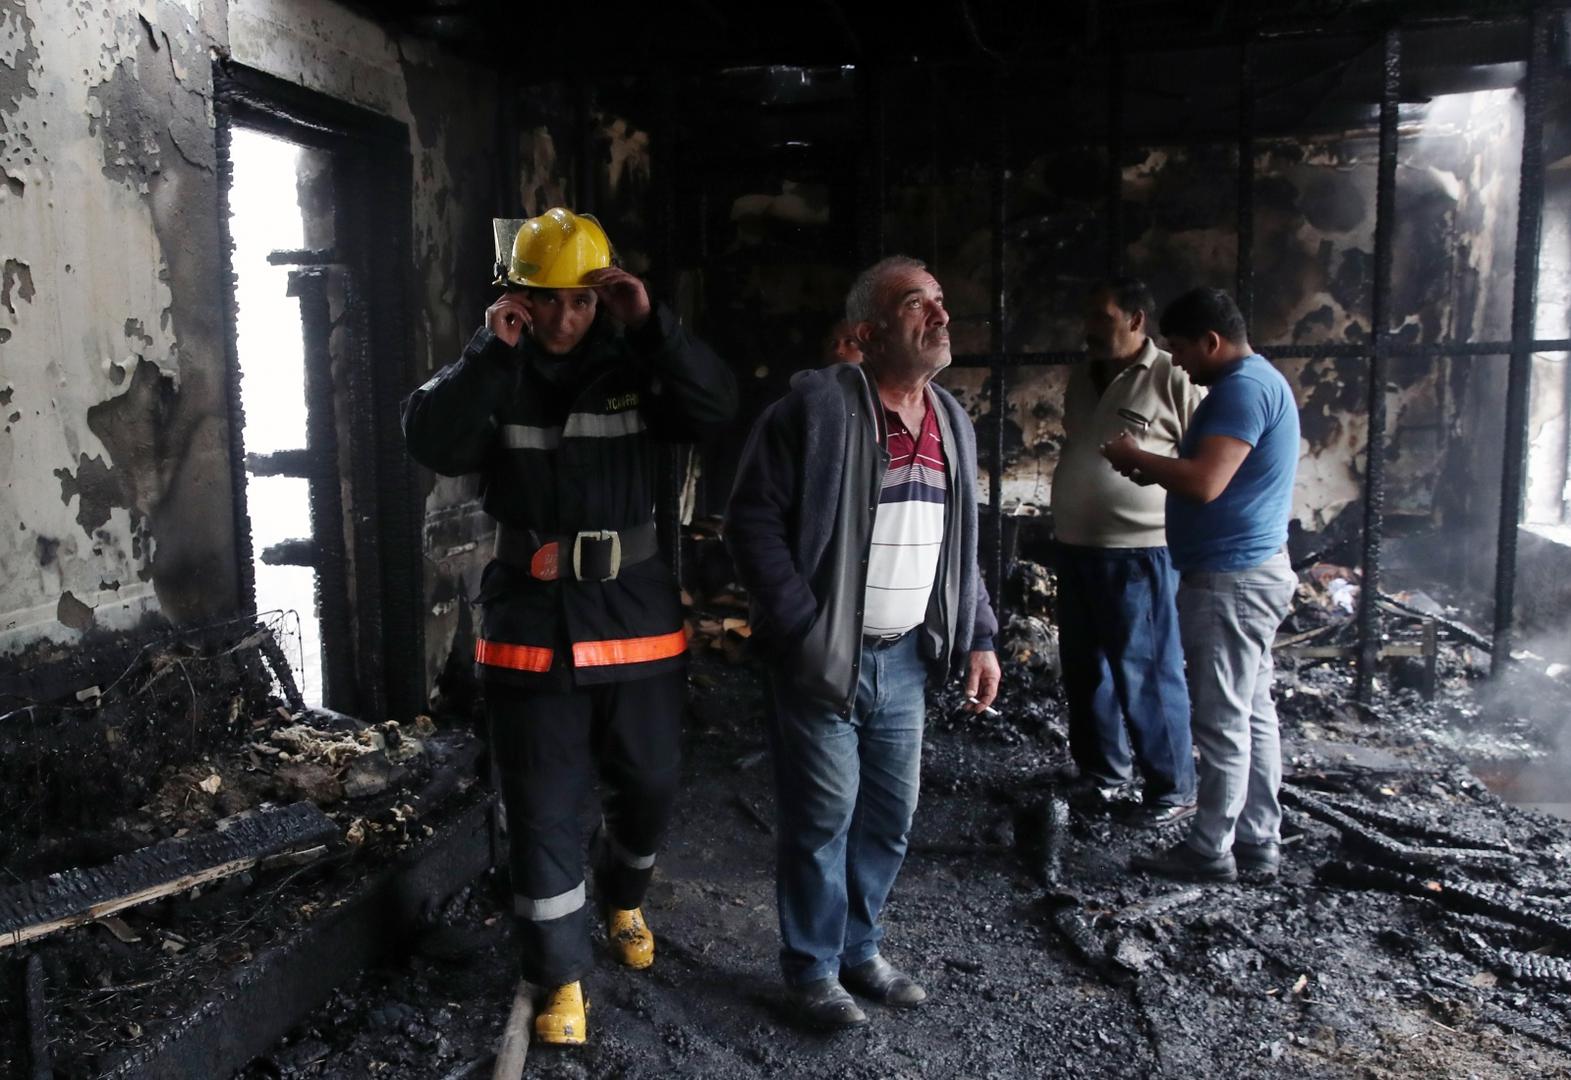 BARDA, AZERBAIJAN - OCTOBER 5, 2020: People examine a residential building damaged in a shelling attack. The situation in Nagorno-Karabakh escalated on September 27, 2020, with reports from Yerevan on the Azerbaijani troops advancing in the direction of Nagorno-Karabakh and shelling its settlements, including the capital city of Stepanakert. Both Azerbaijan and Armenia have declared martial law and military mobilization, reporting on casualties and injuries among civilians as well. Valery Sharifulin/TASS Photo via Newscom Newscom/PIXSELL